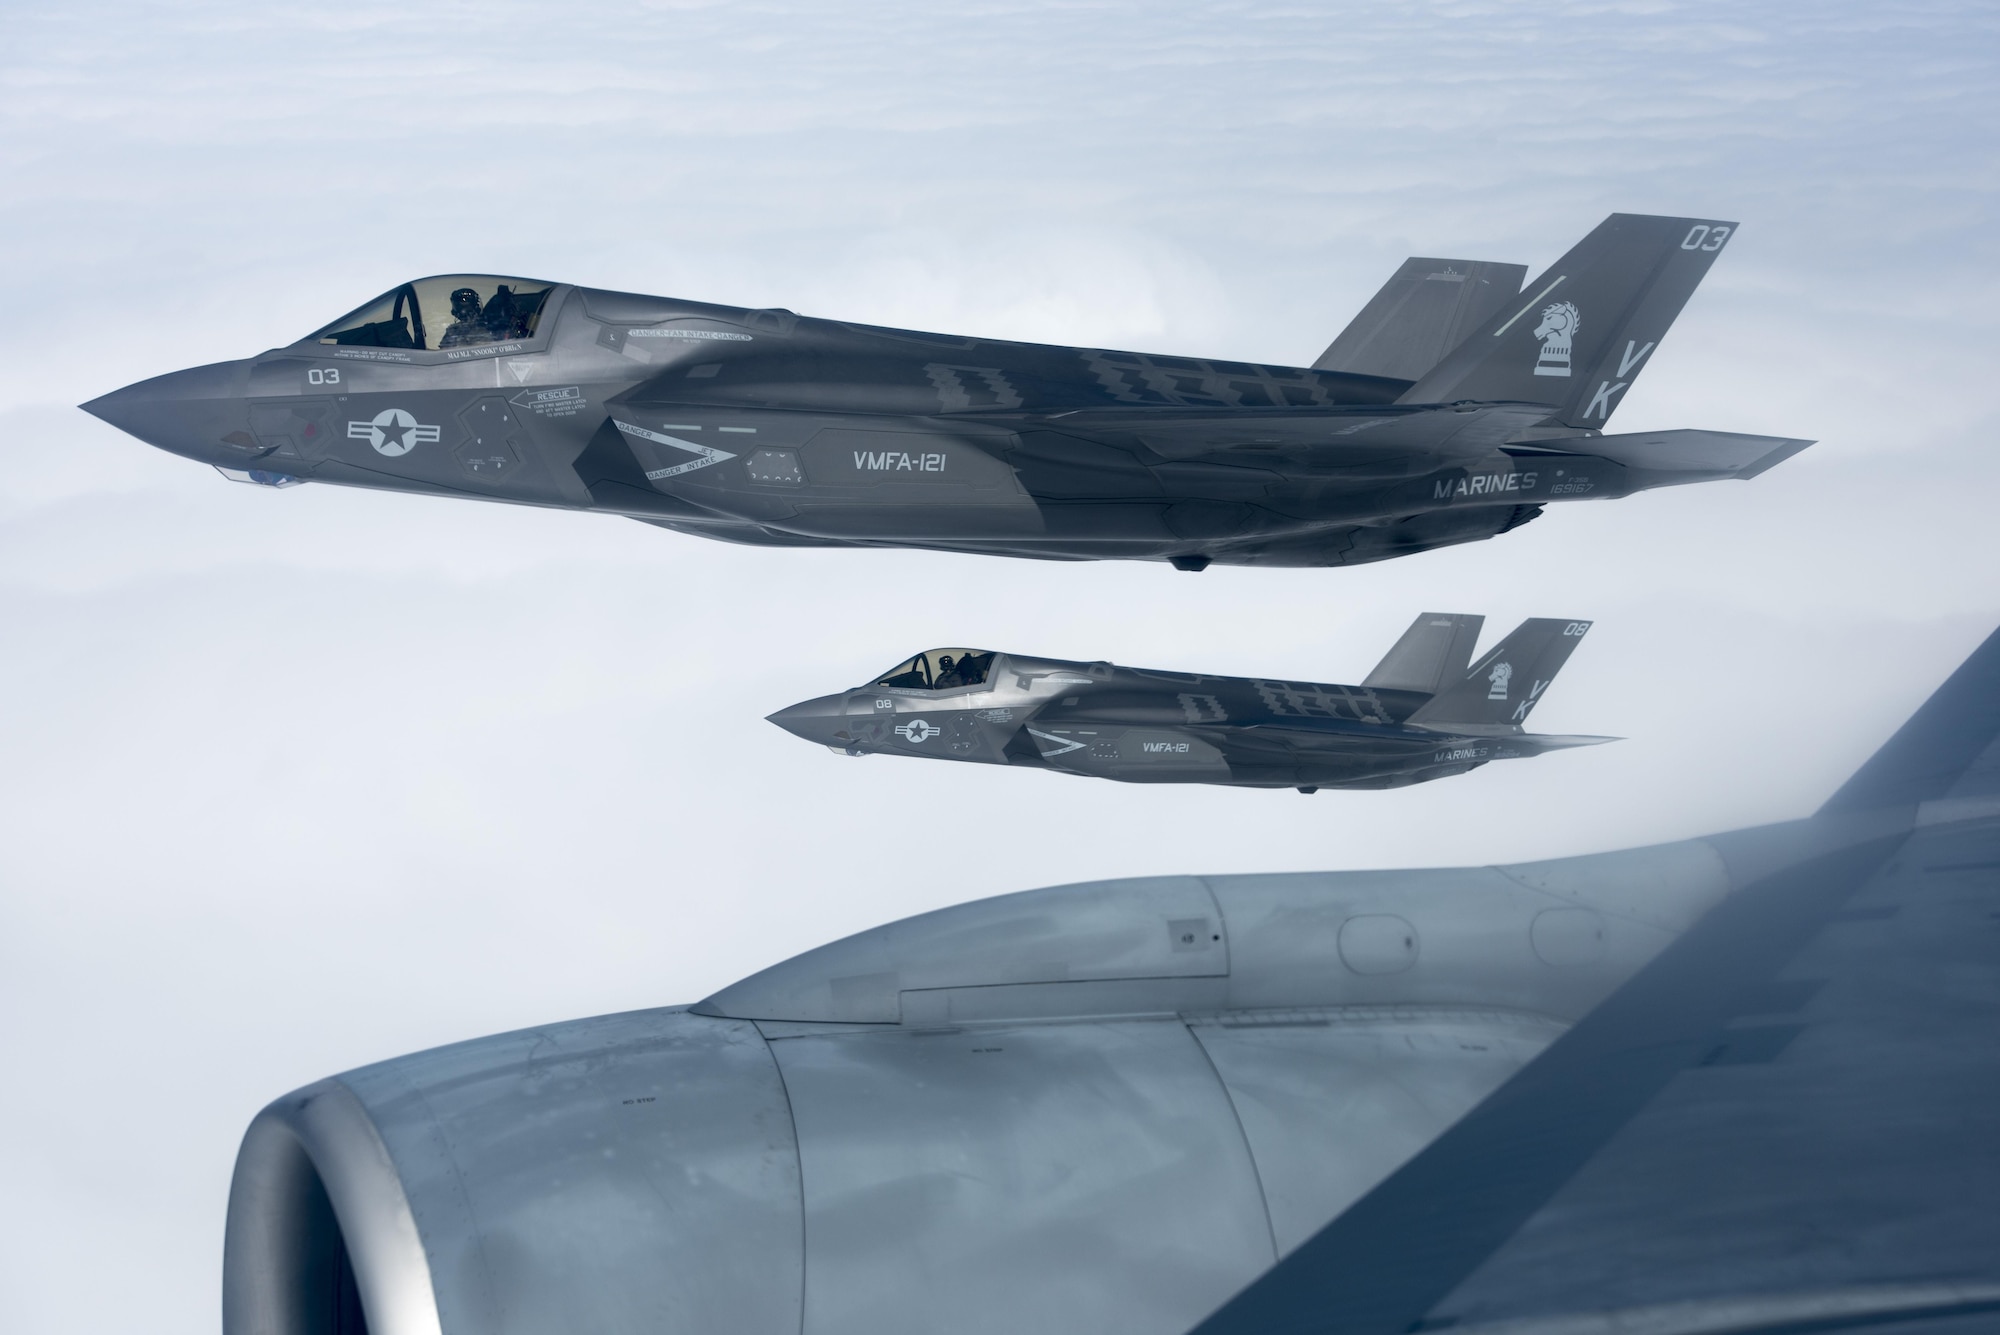 U.S. Marine Corps F-35B Lightning IIs from Marine Fighter Attack Squadron 121, fly in formation with a KC-135 Stratotanker from the 909th Air Refueling Squadron March 14, 2017, over the Pacific Ocean. The two units conducted aerial refueling for the first time within the 909th’s area of operation. (U.S. Air Force photo by Senior Airman John Linzmeier)